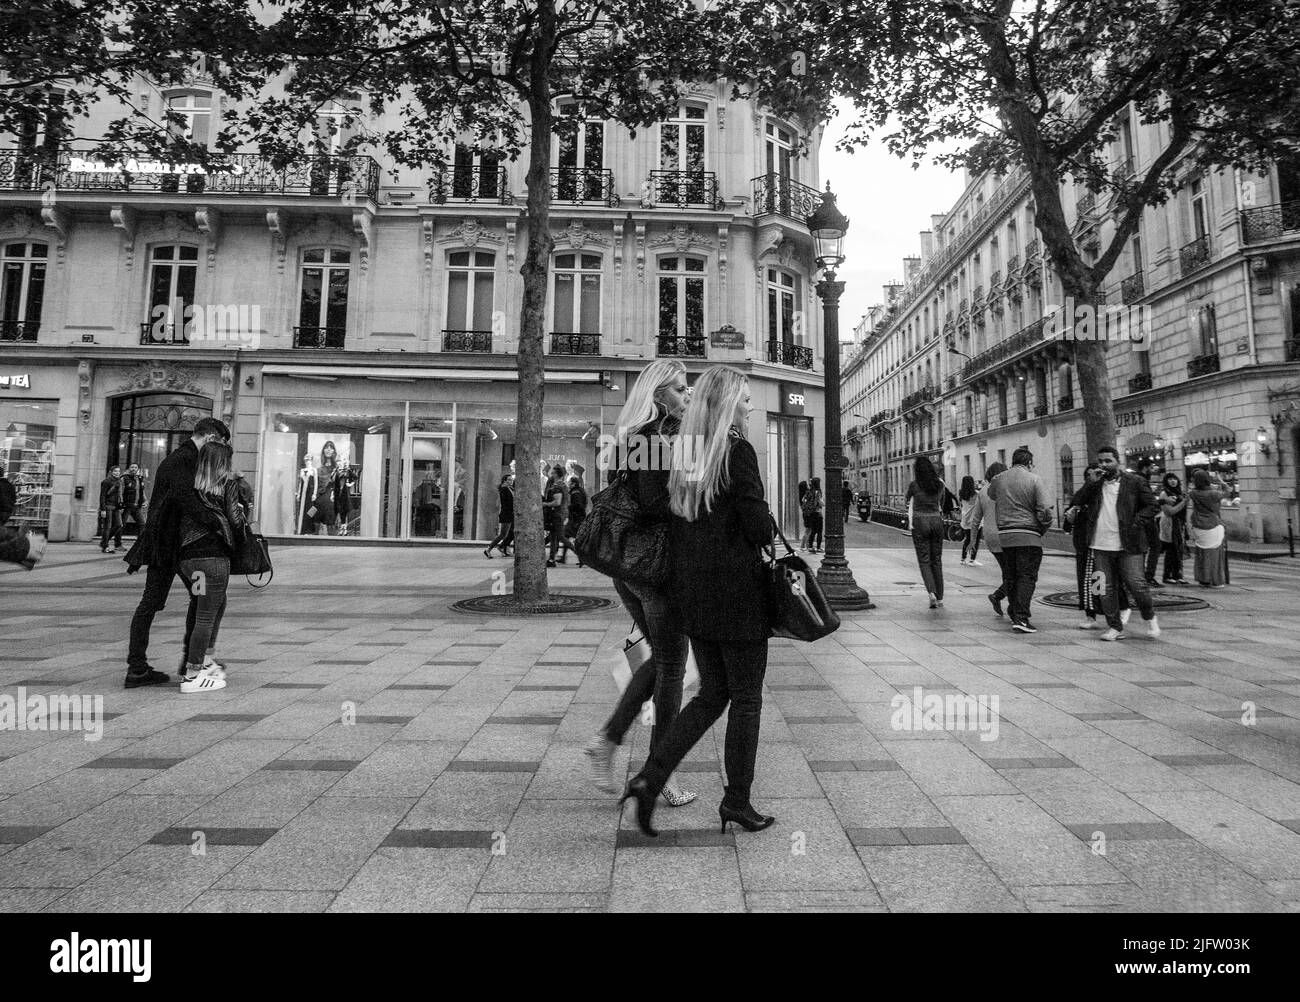 05-14-2016  Paris.   Blondies  blondes in heels and smiling  on Champs Elysees of Paris  - stylized in monochrome. Stock Photo